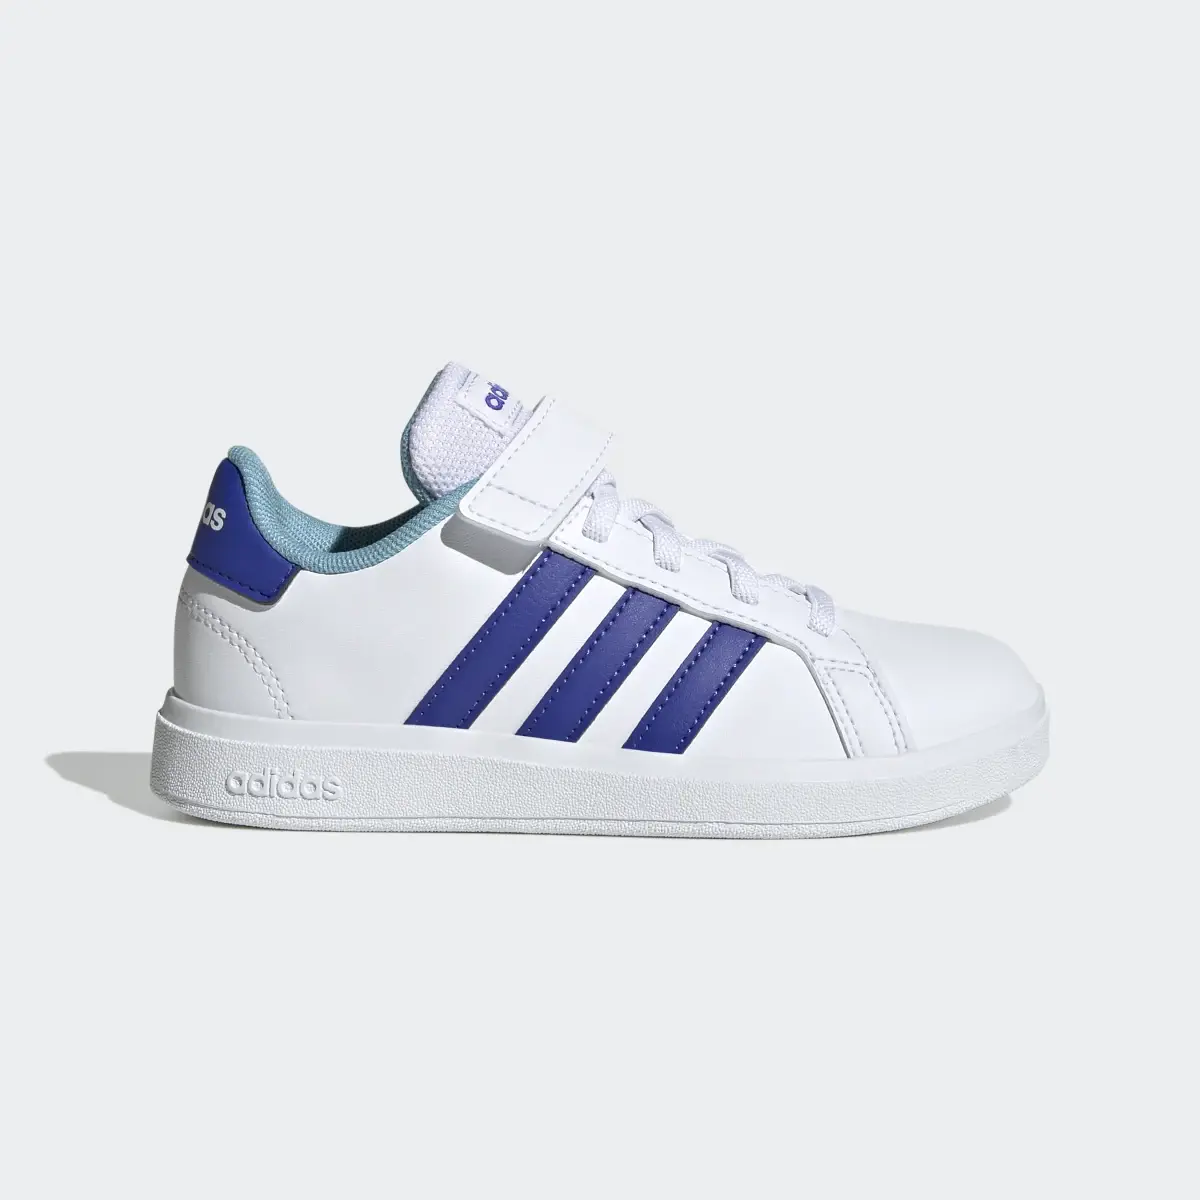 Adidas Grand Court Elastic Lace and Top Strap Ayakkabı. 2